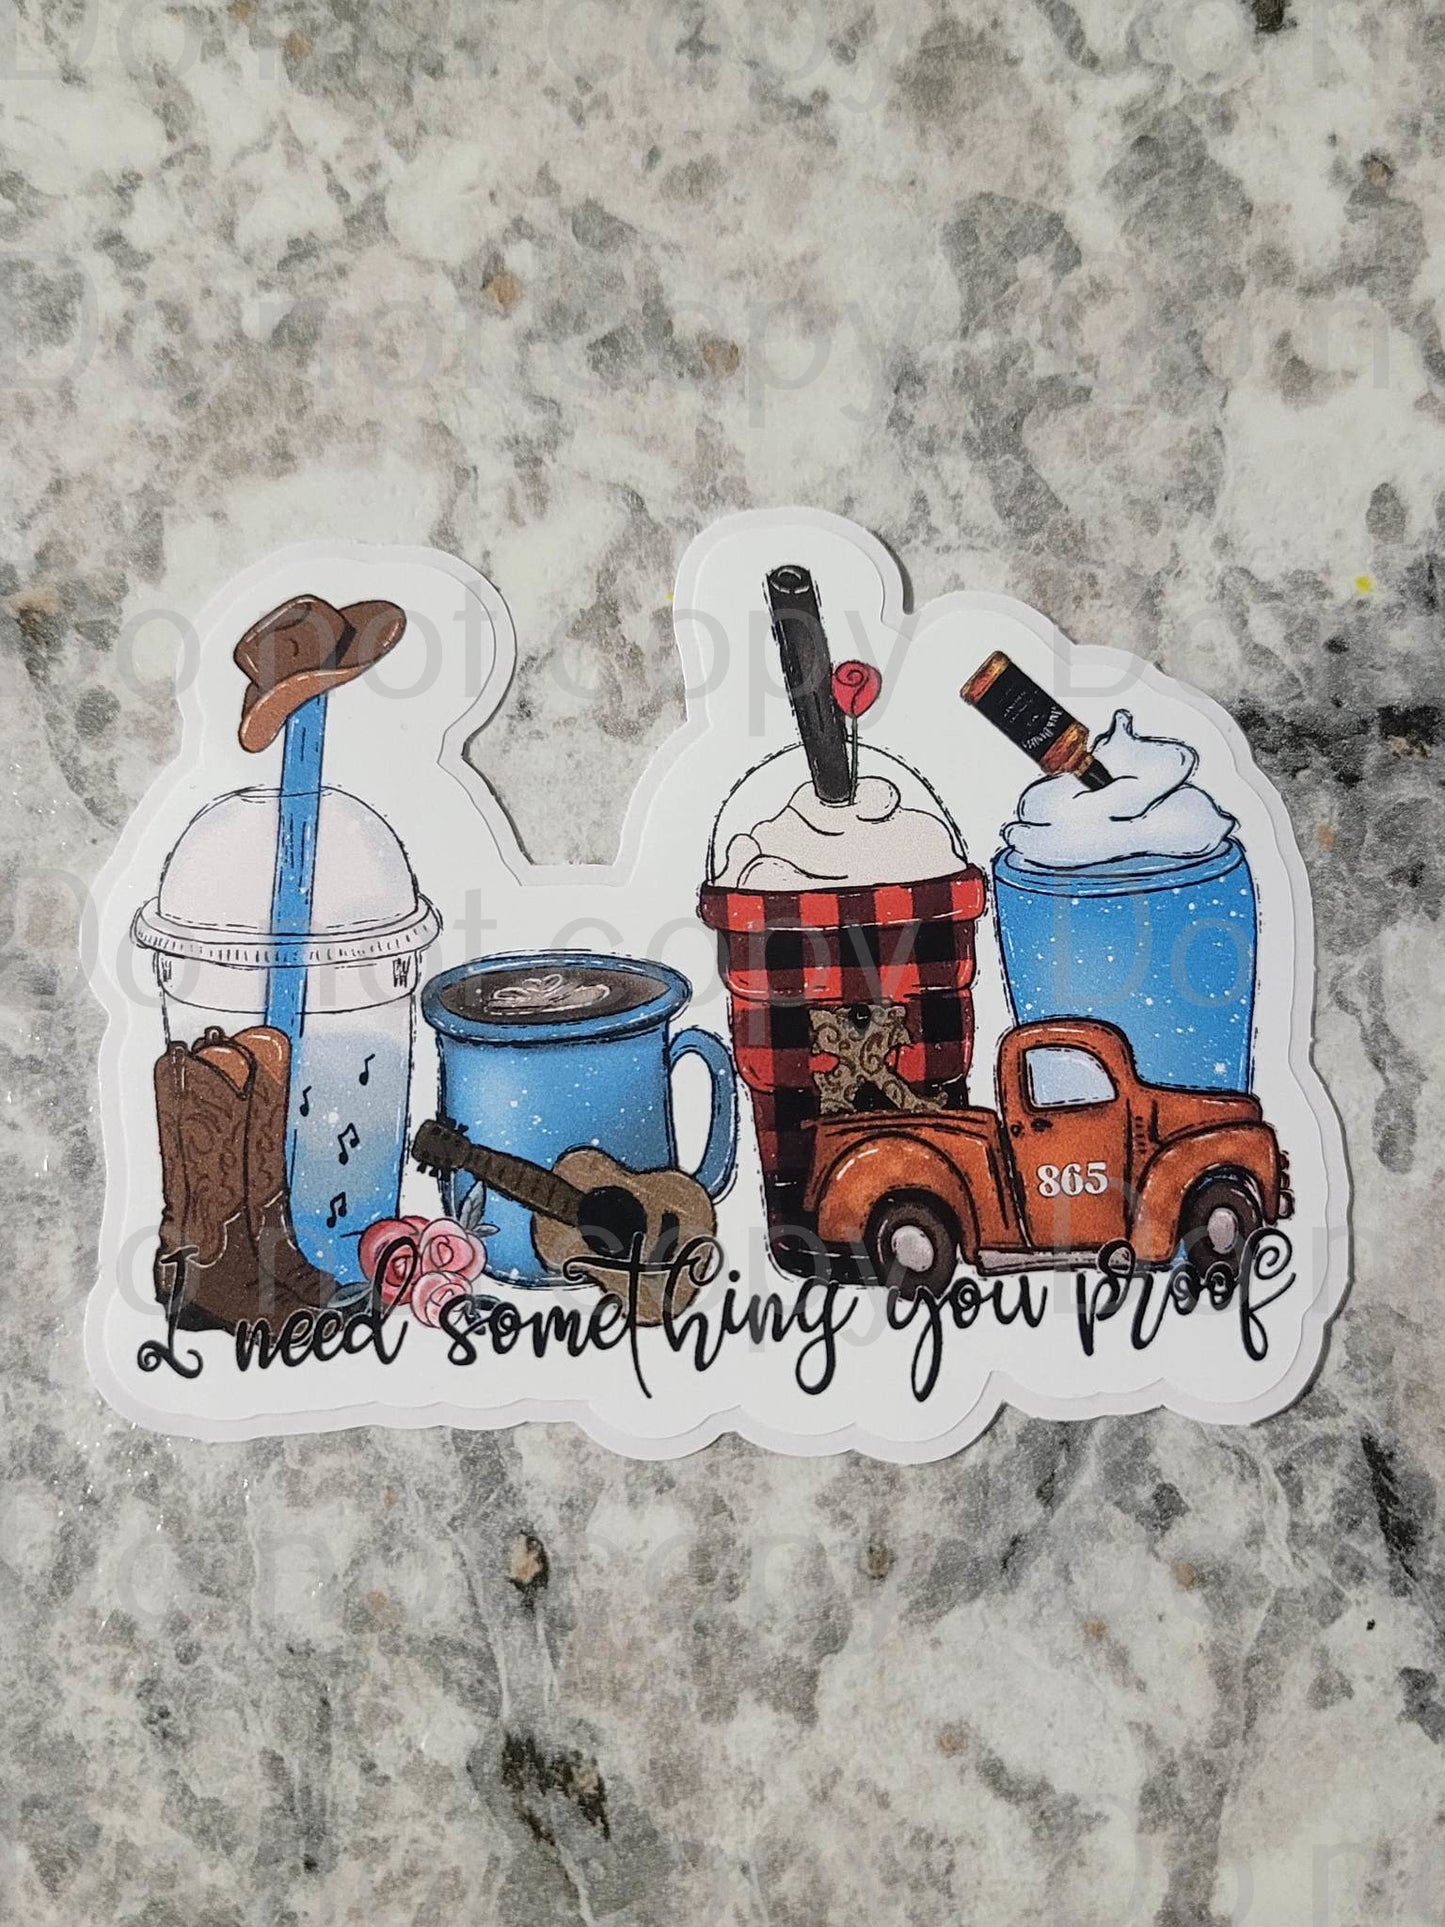 I need something you proof coffee cups Die cut sticker 3-5 Business Day TAT.